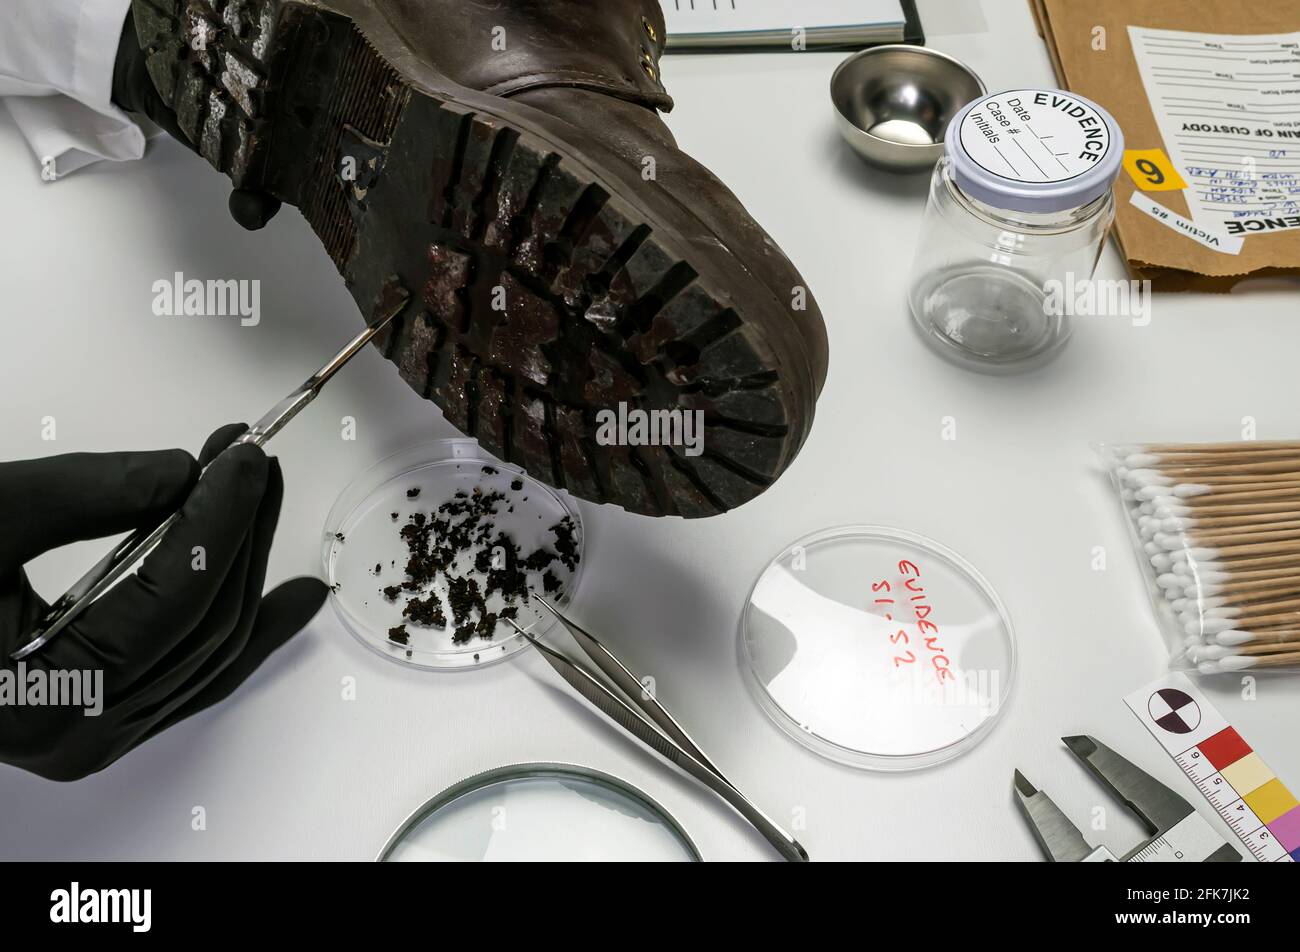 Specializing police officer analyzes ground in a victim's shoe murder with one tweezers, conceptual image Stock Photo